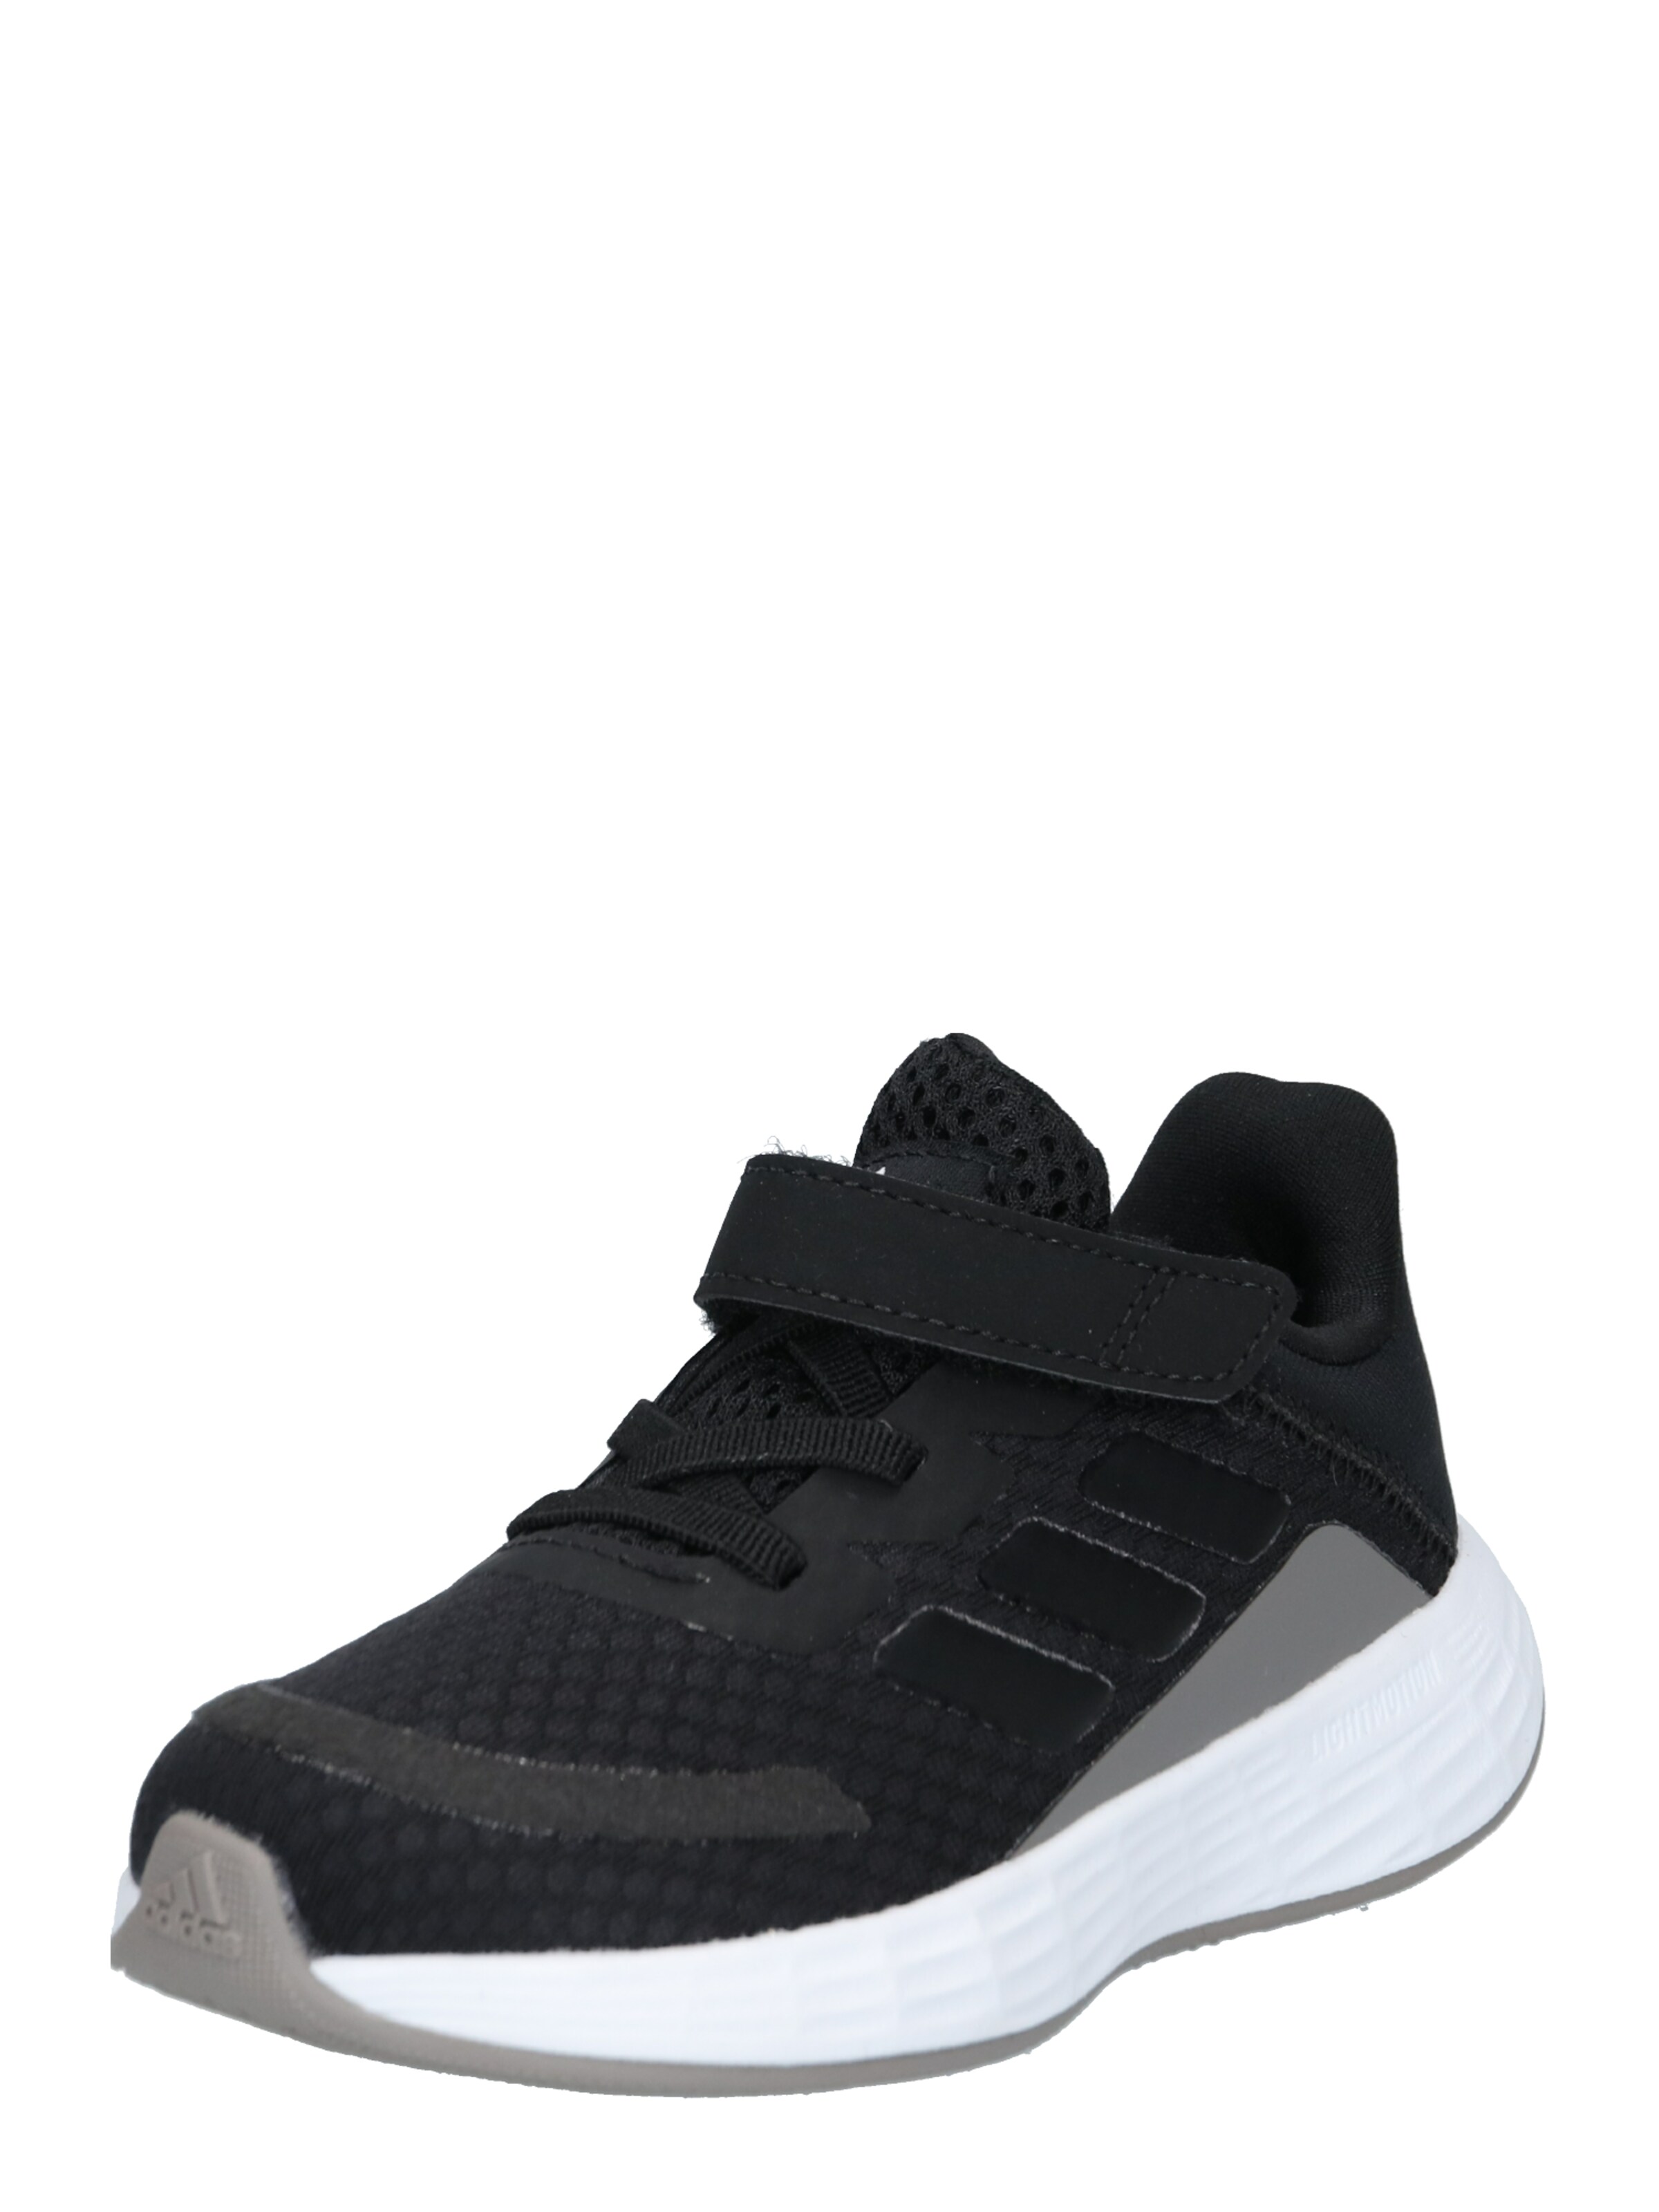 ADIDAS PERFORMANCE Sports shoe 'Duramo' in Black | ABOUT YOU